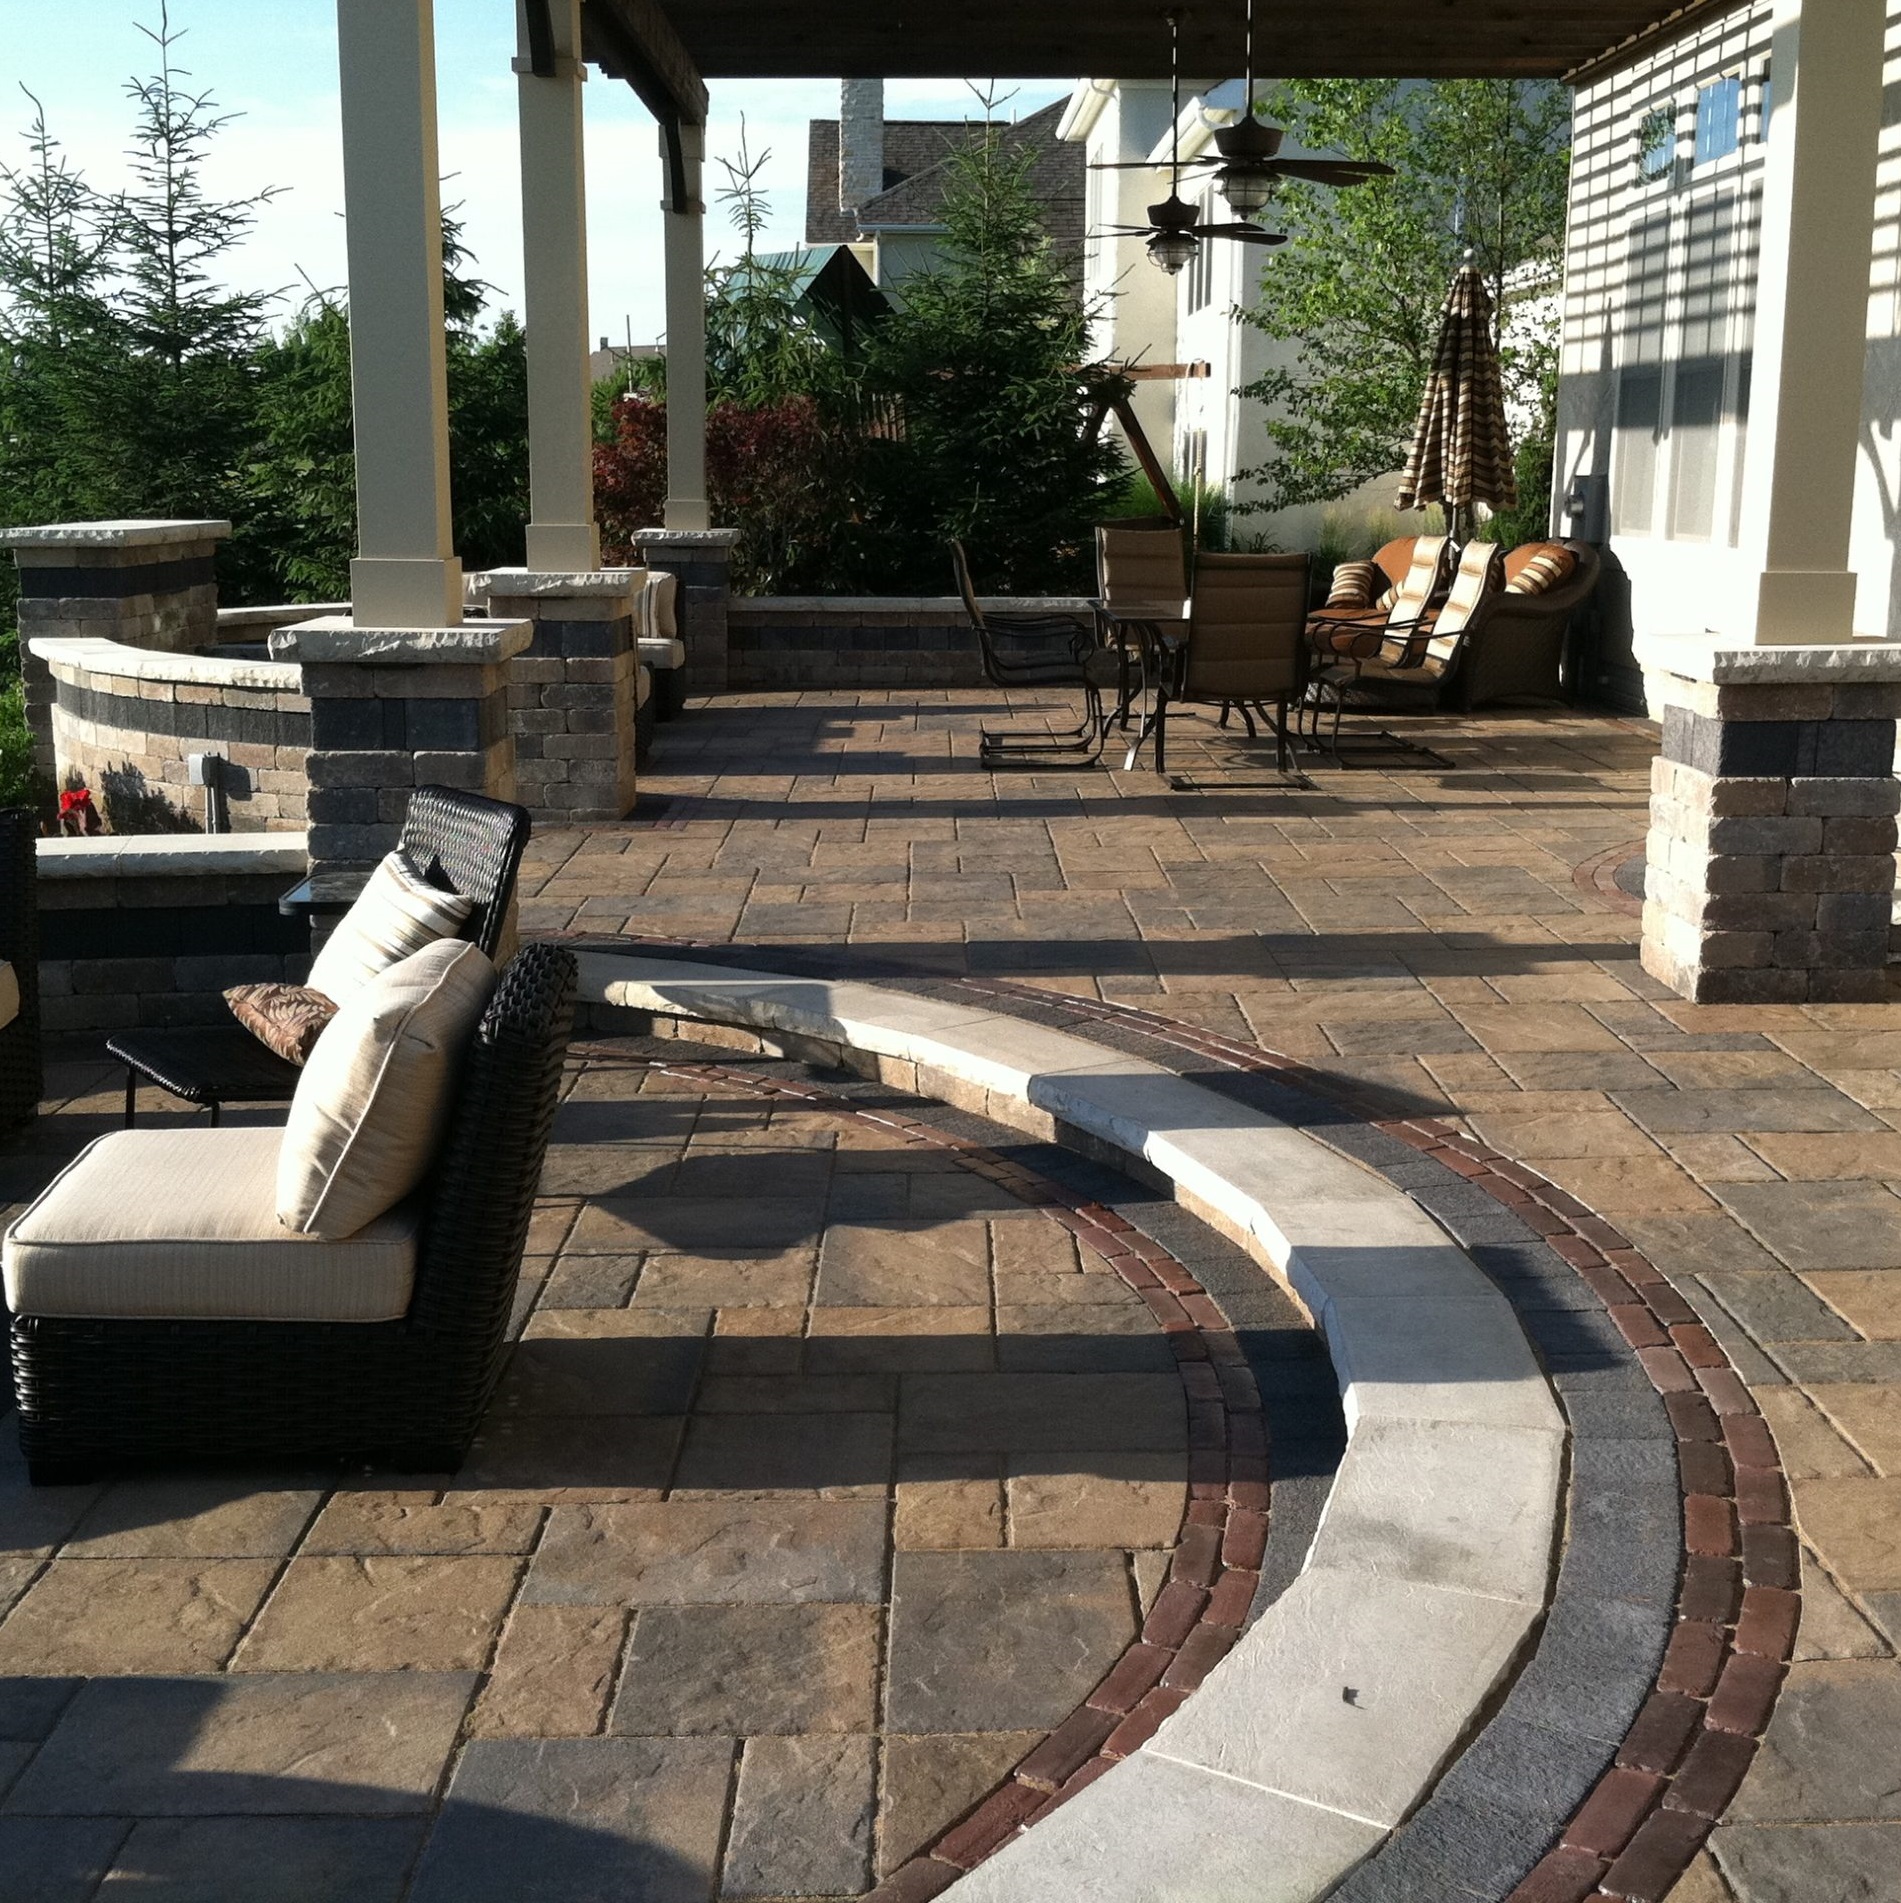 Side view of patio hardscape